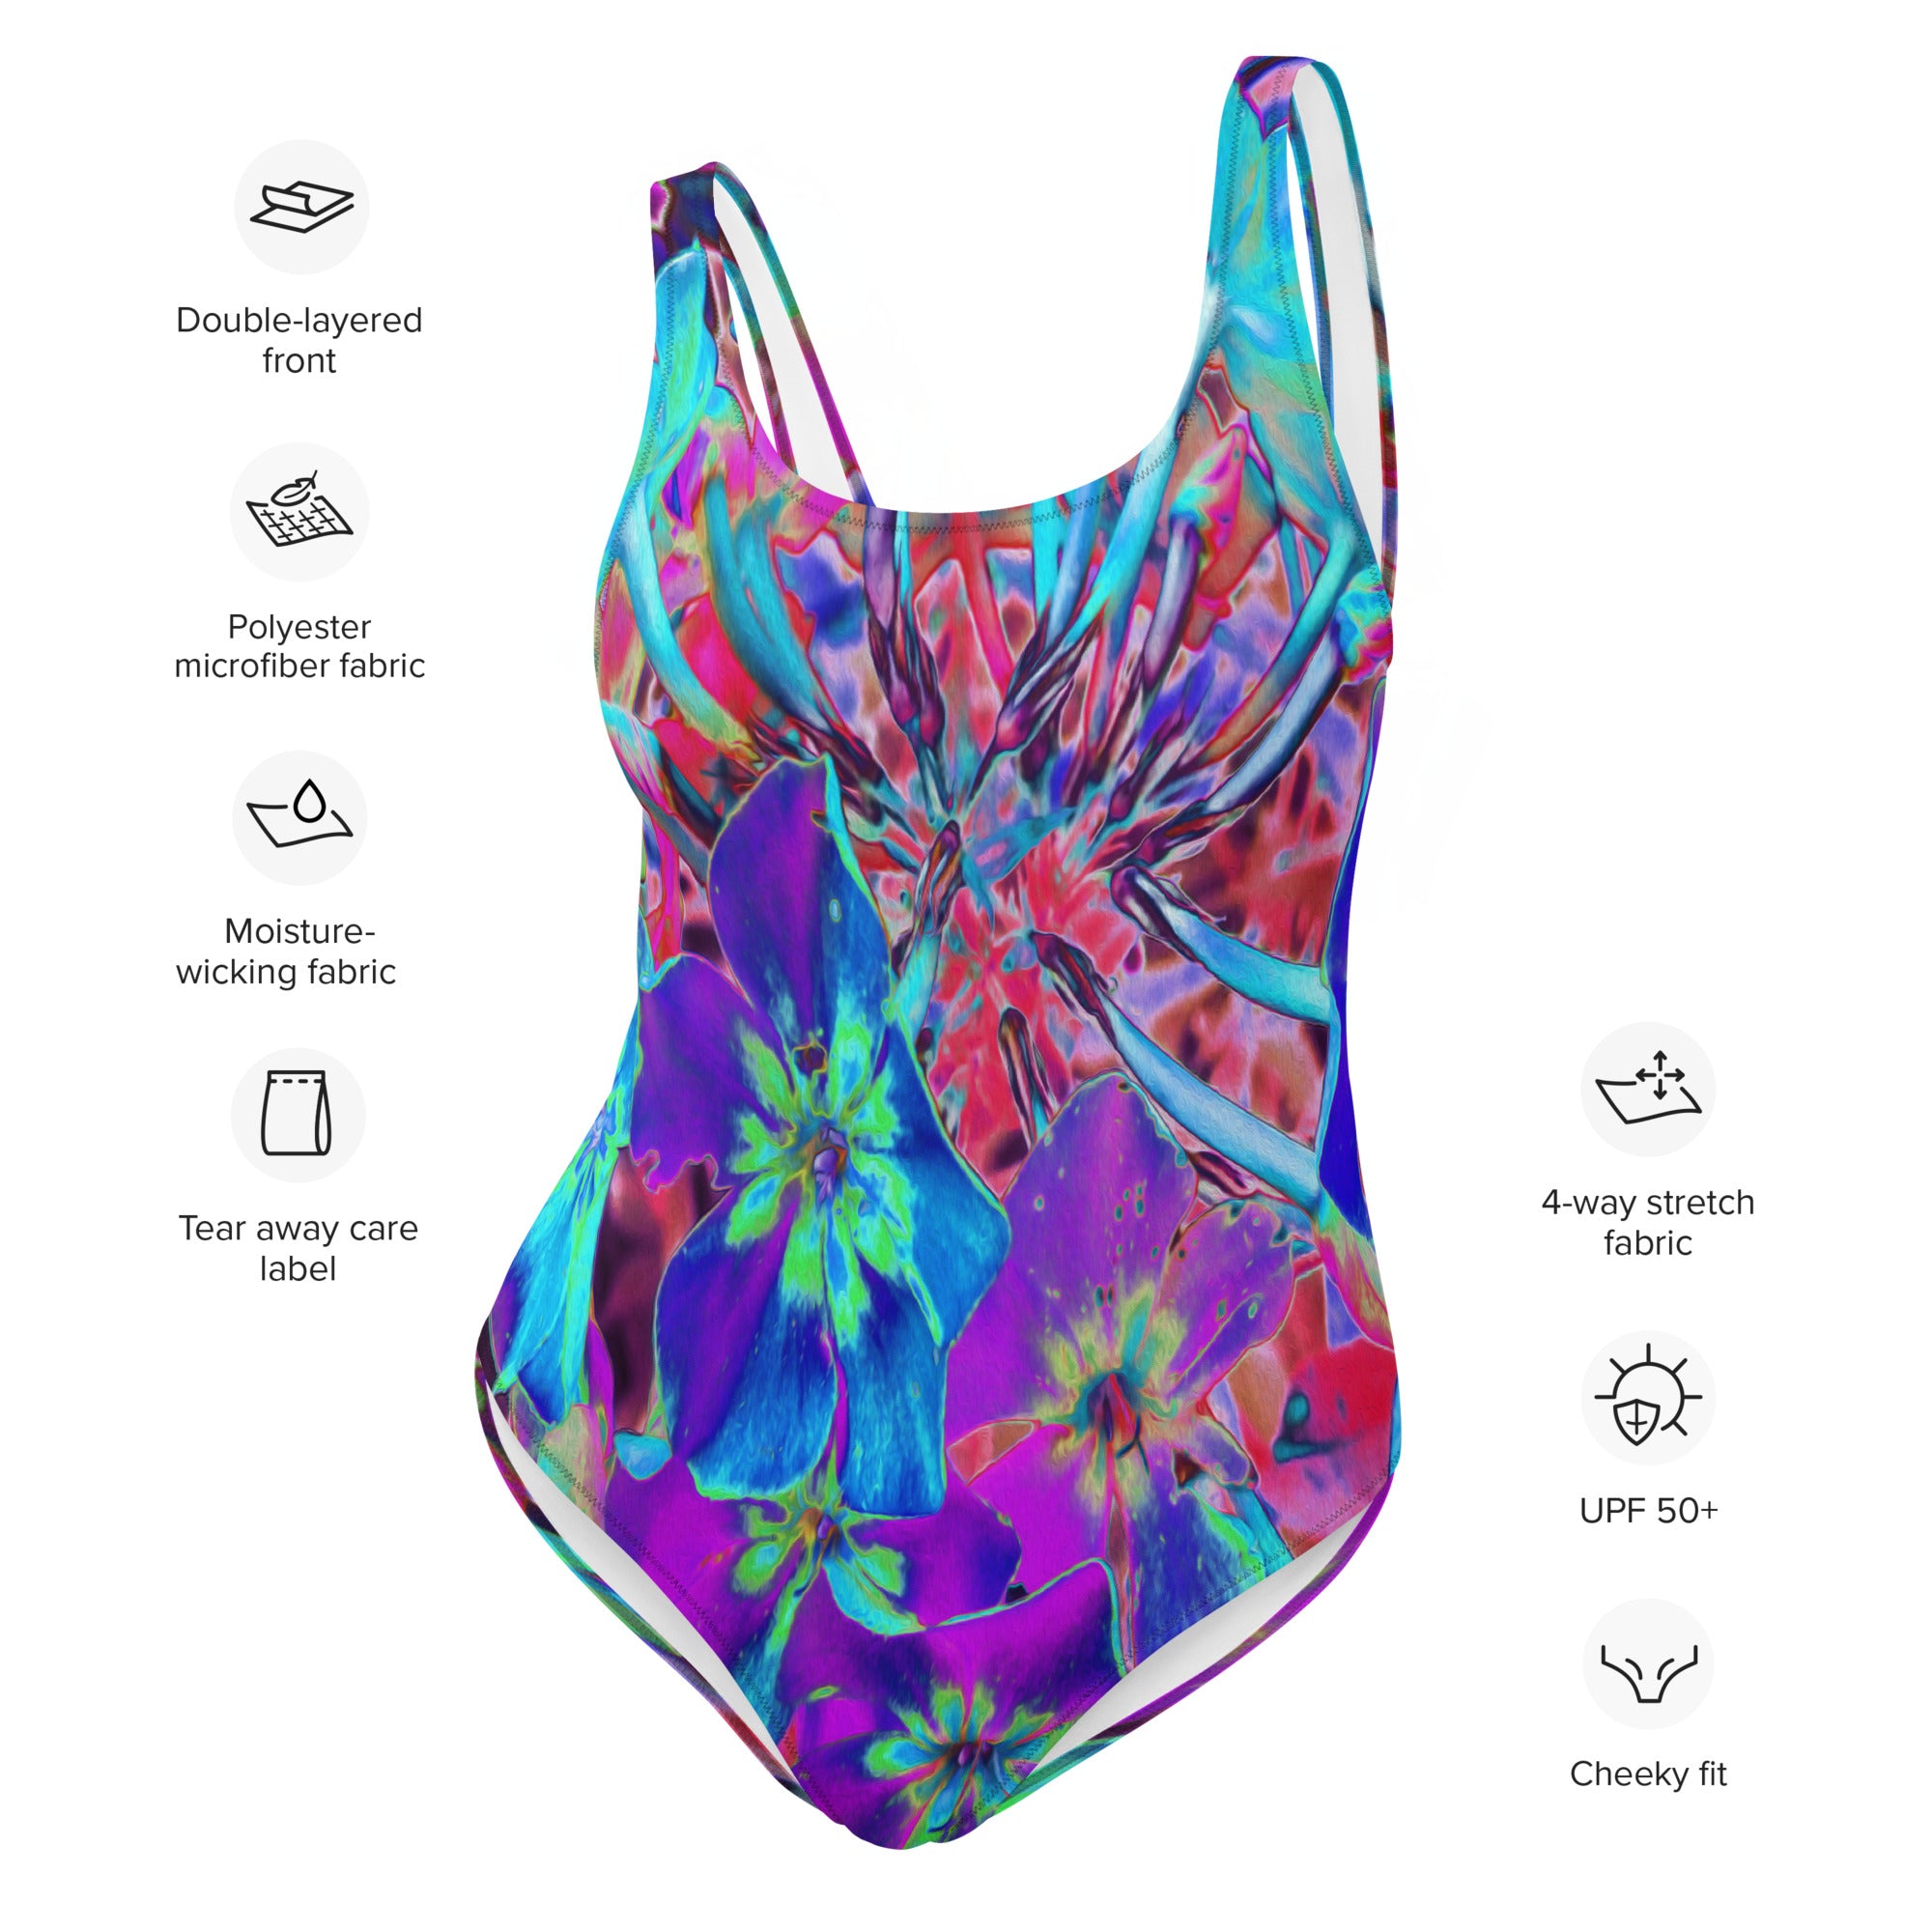 One Piece Swimsuits - Blooming Abstract Purple and Blue Flower